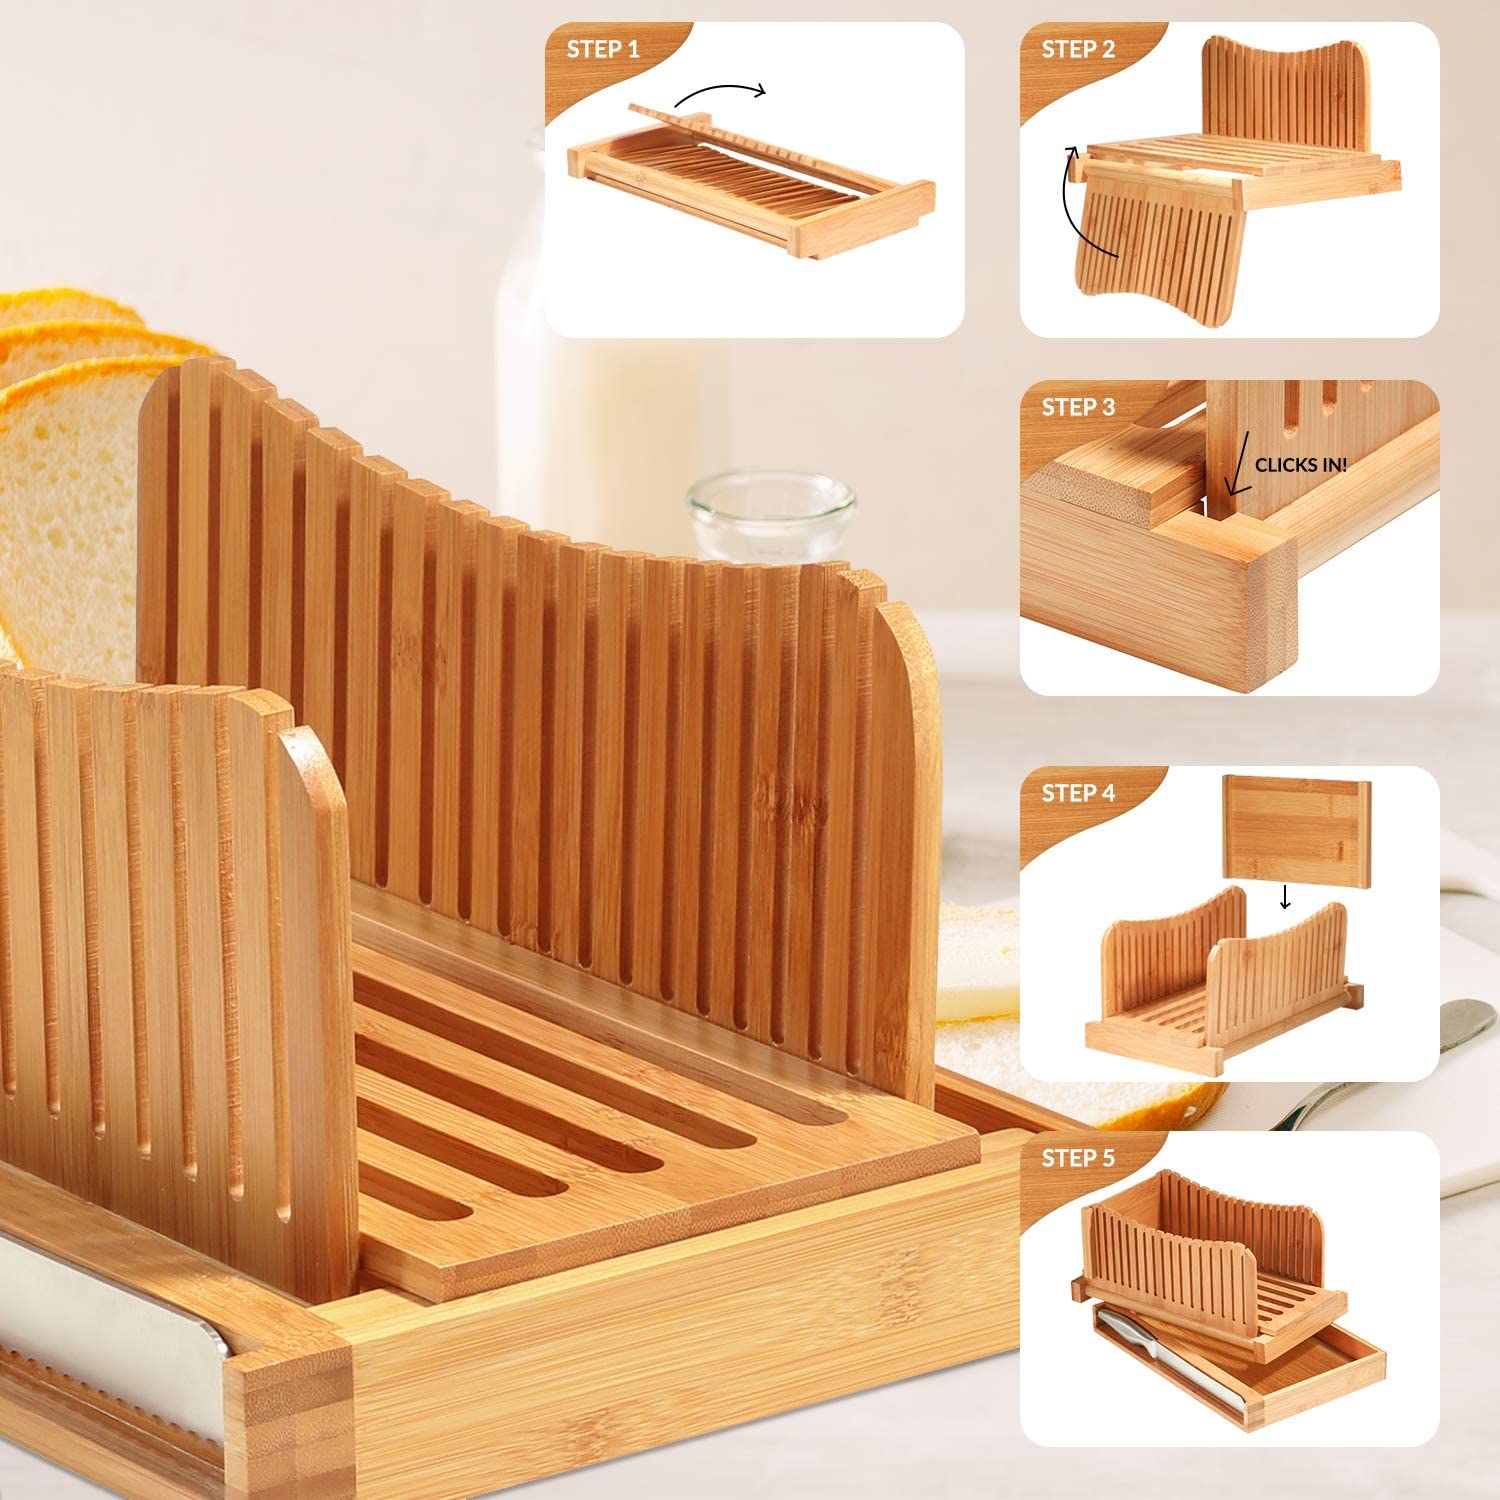 Luxury Bamboo Bread Slicer with Knife and Bamboo Corner Kitchen Shelf